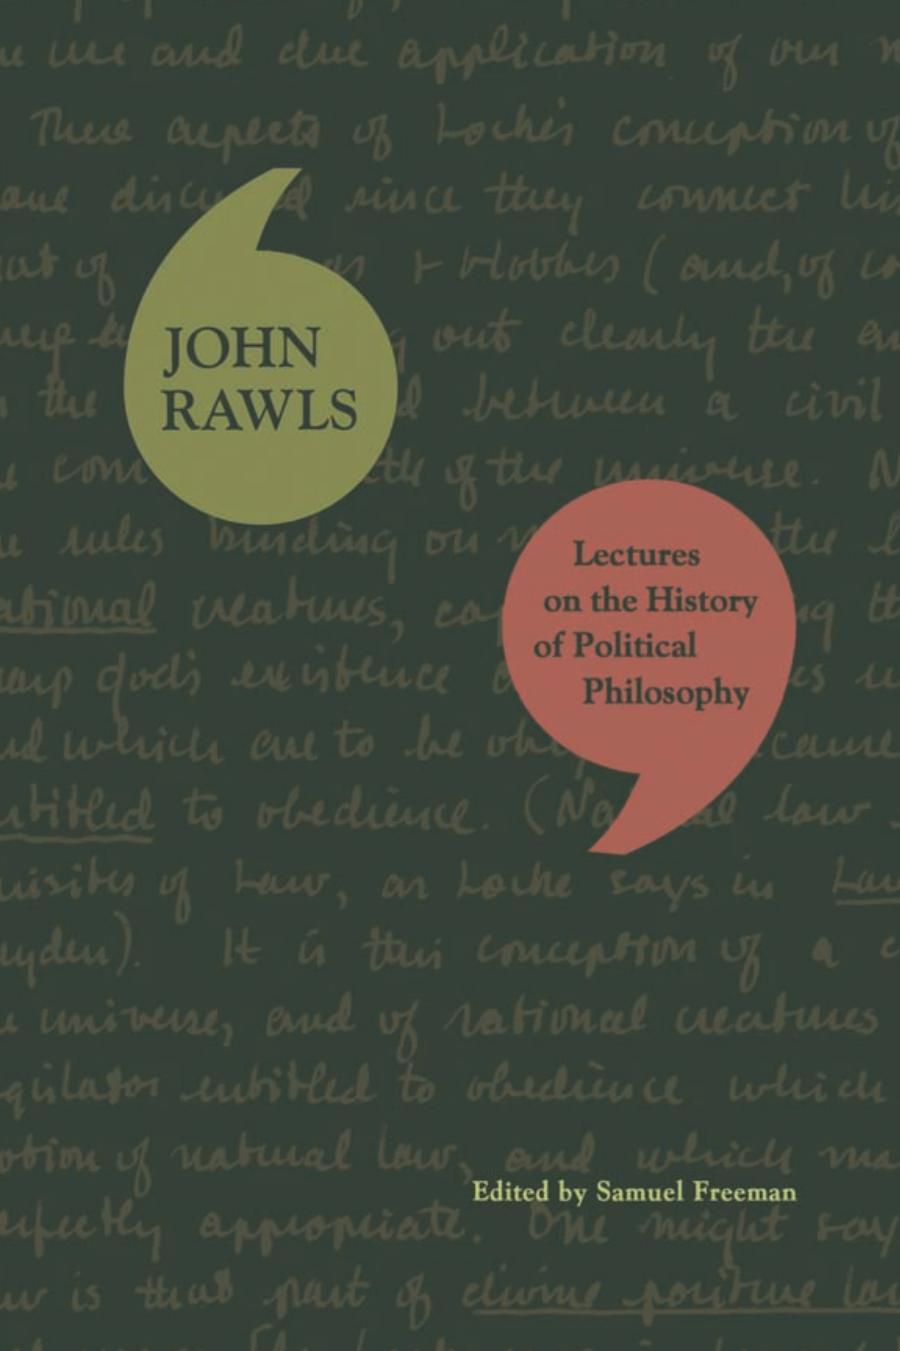 Lectures on the History of Political Philosophy by John Rawls